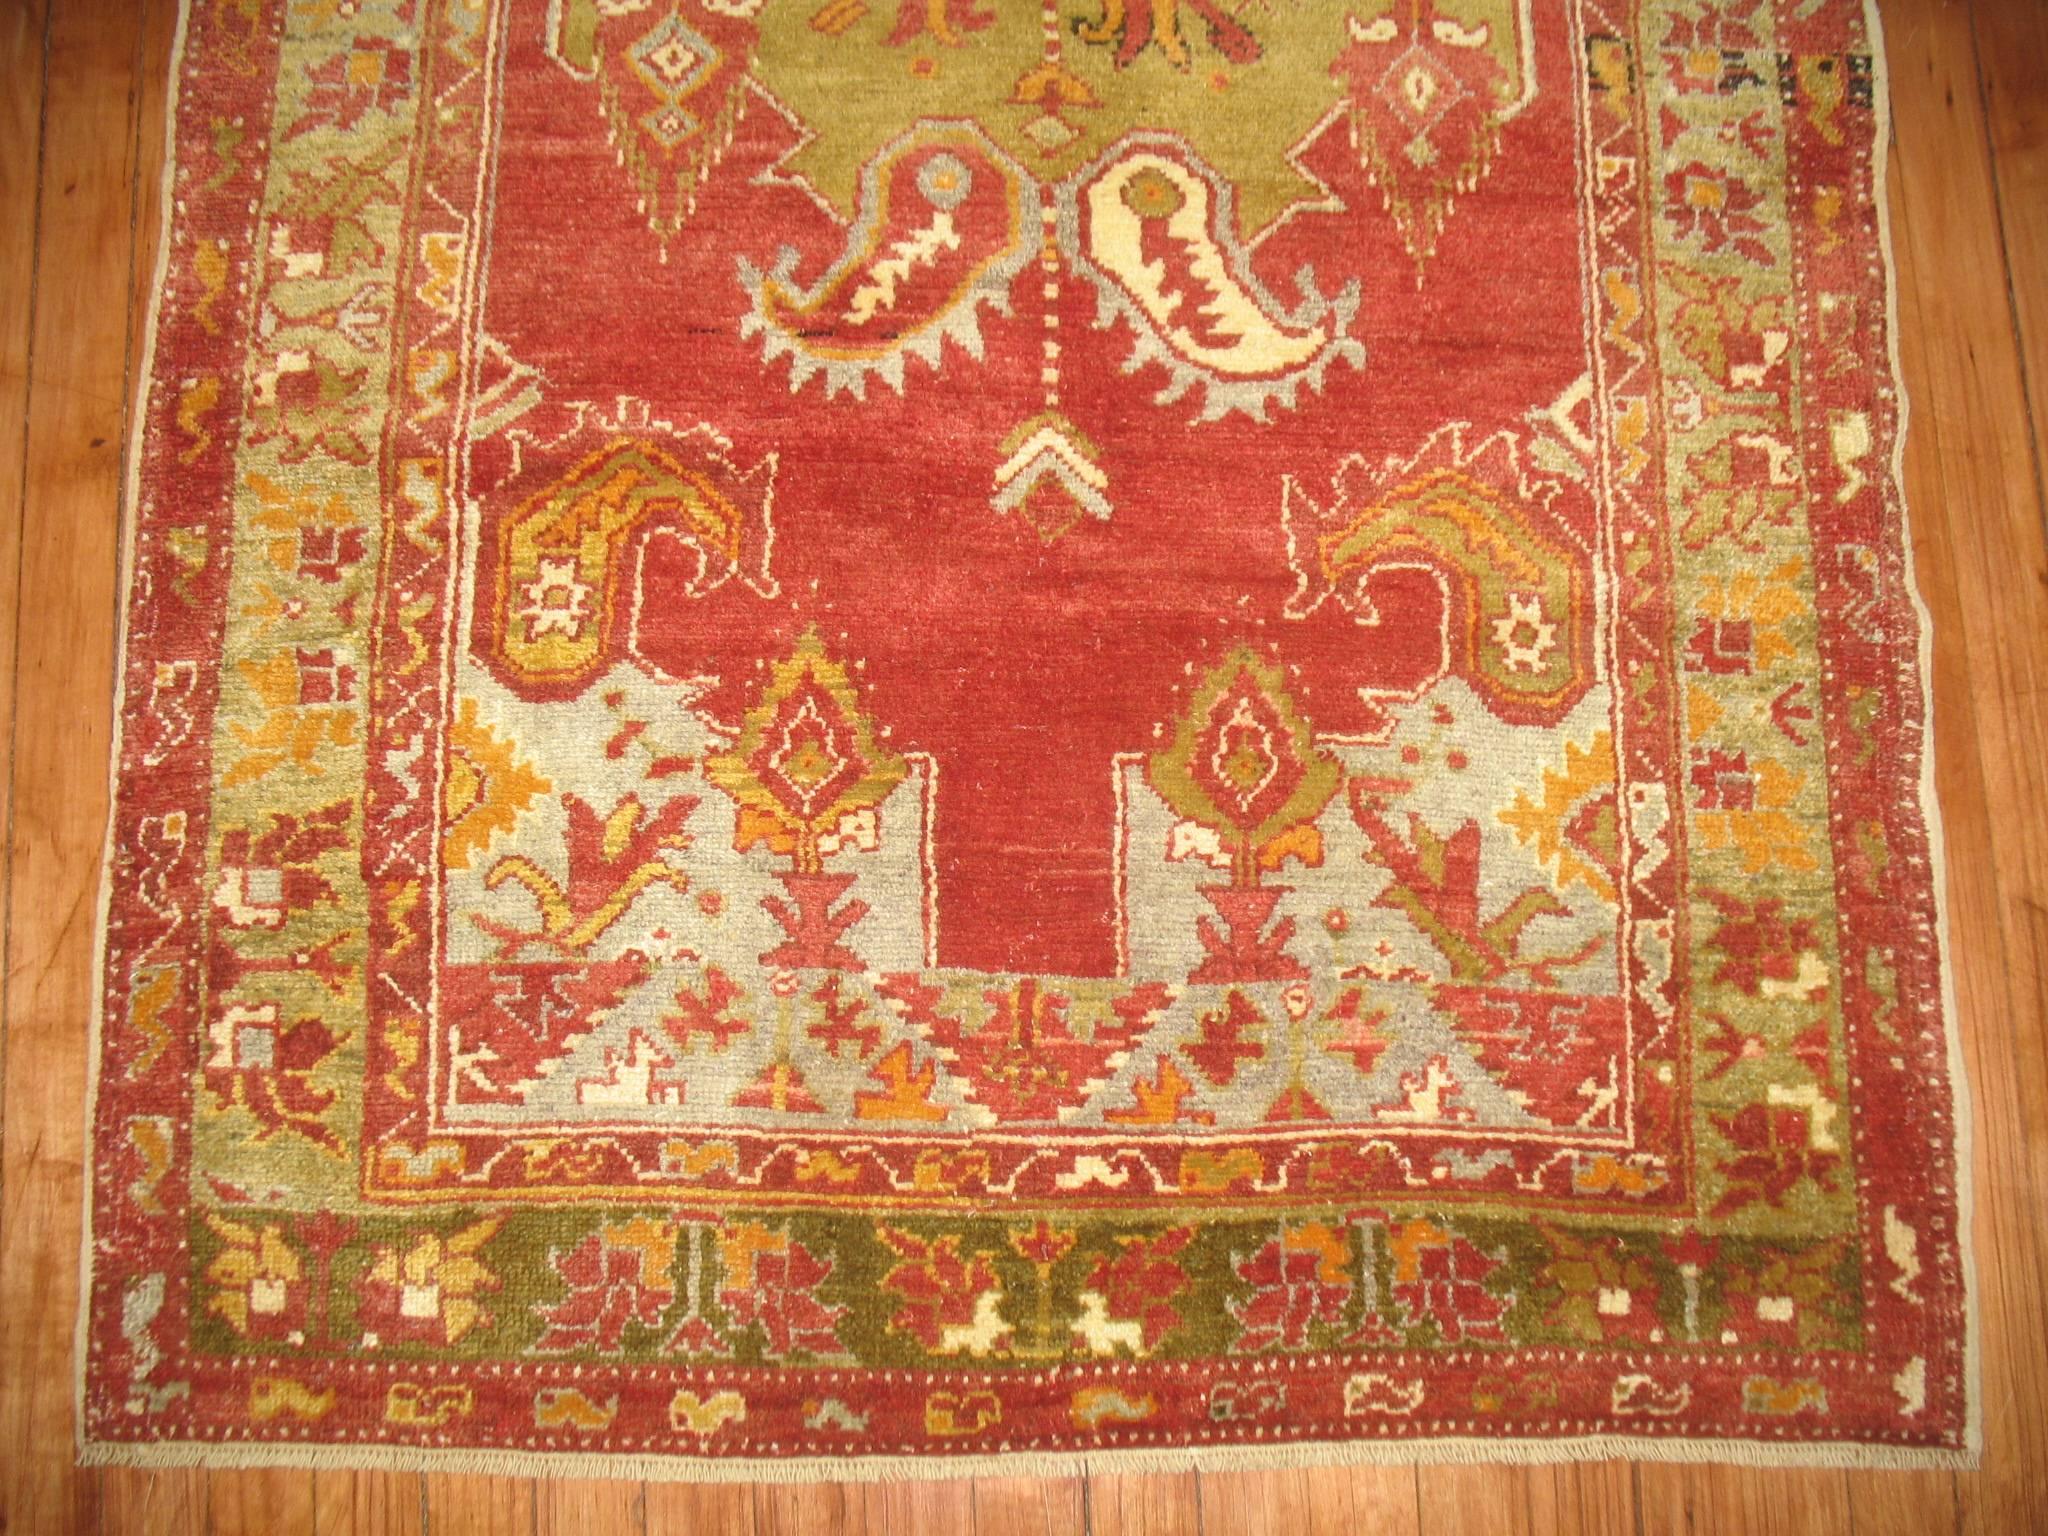 A one of a kind vintage Turkish Oushak decorative throw rug.